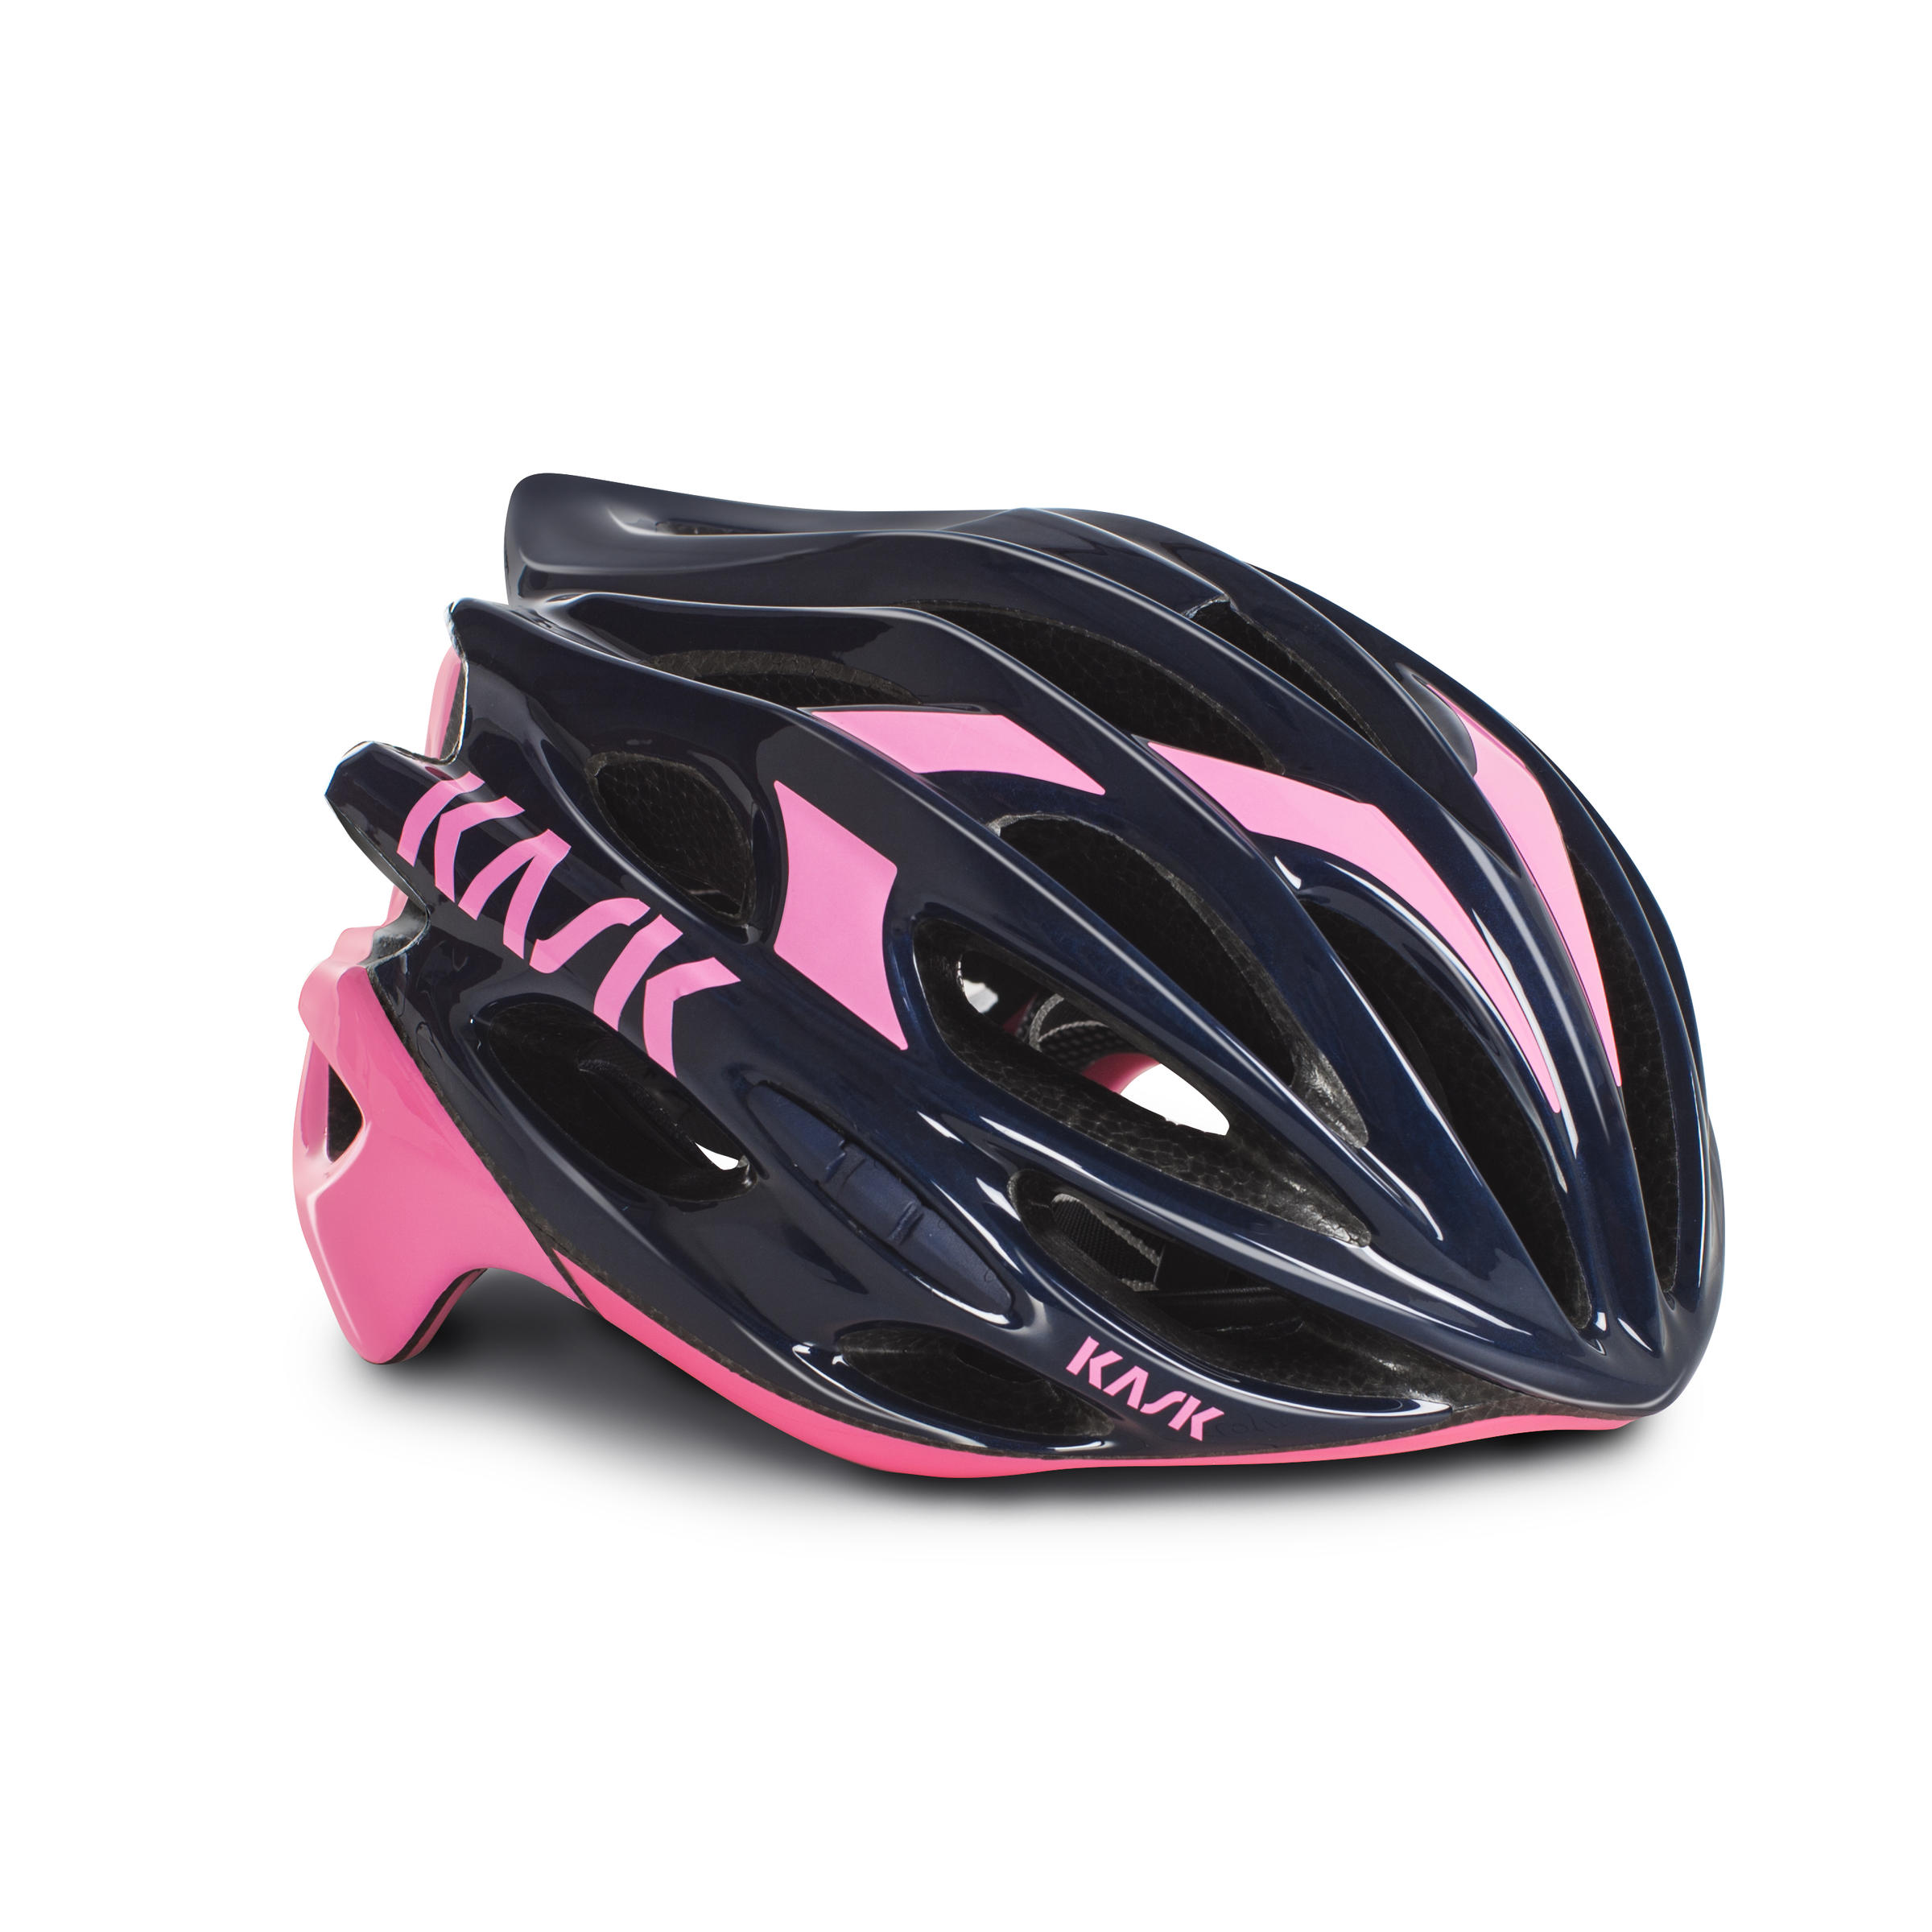 KASK Mojito - The Bike Zone | Shop Online or In-Store